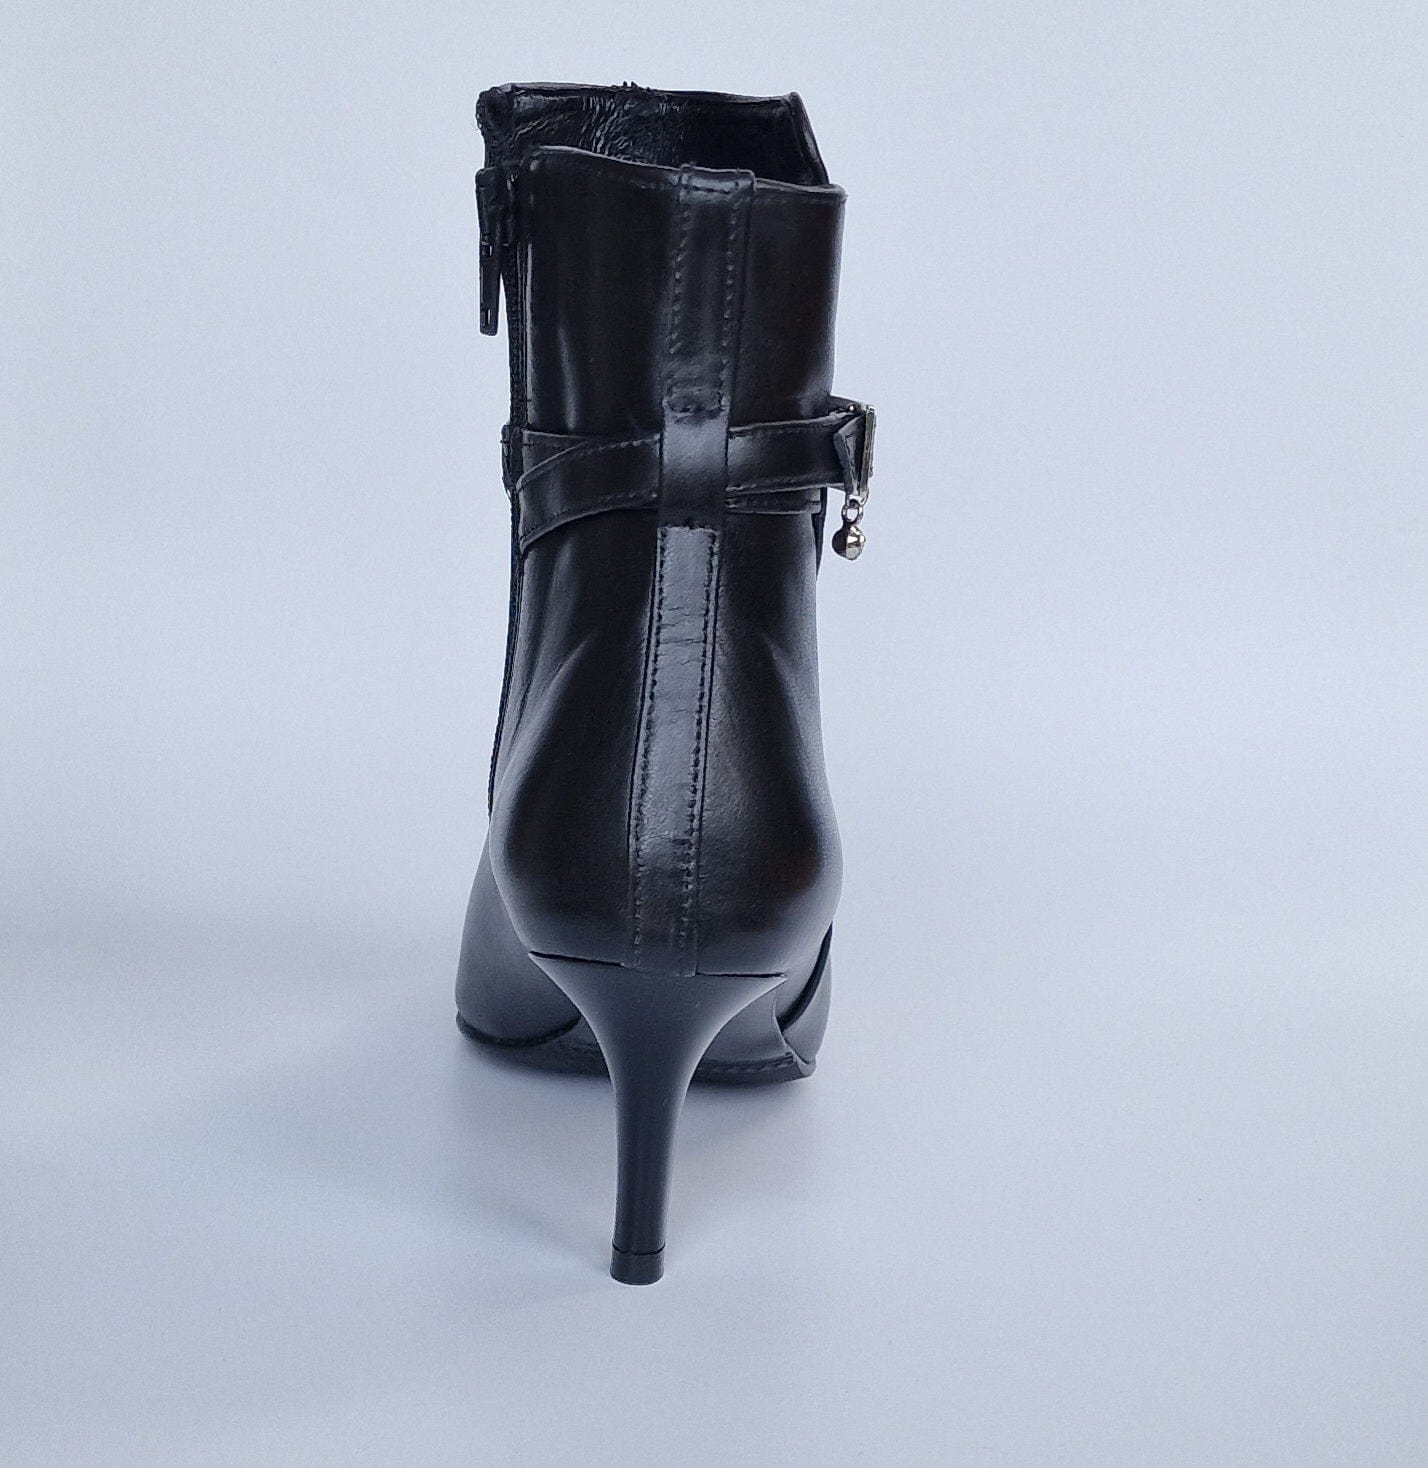 Pointed toe black leather, kitten heel small size ankle boots